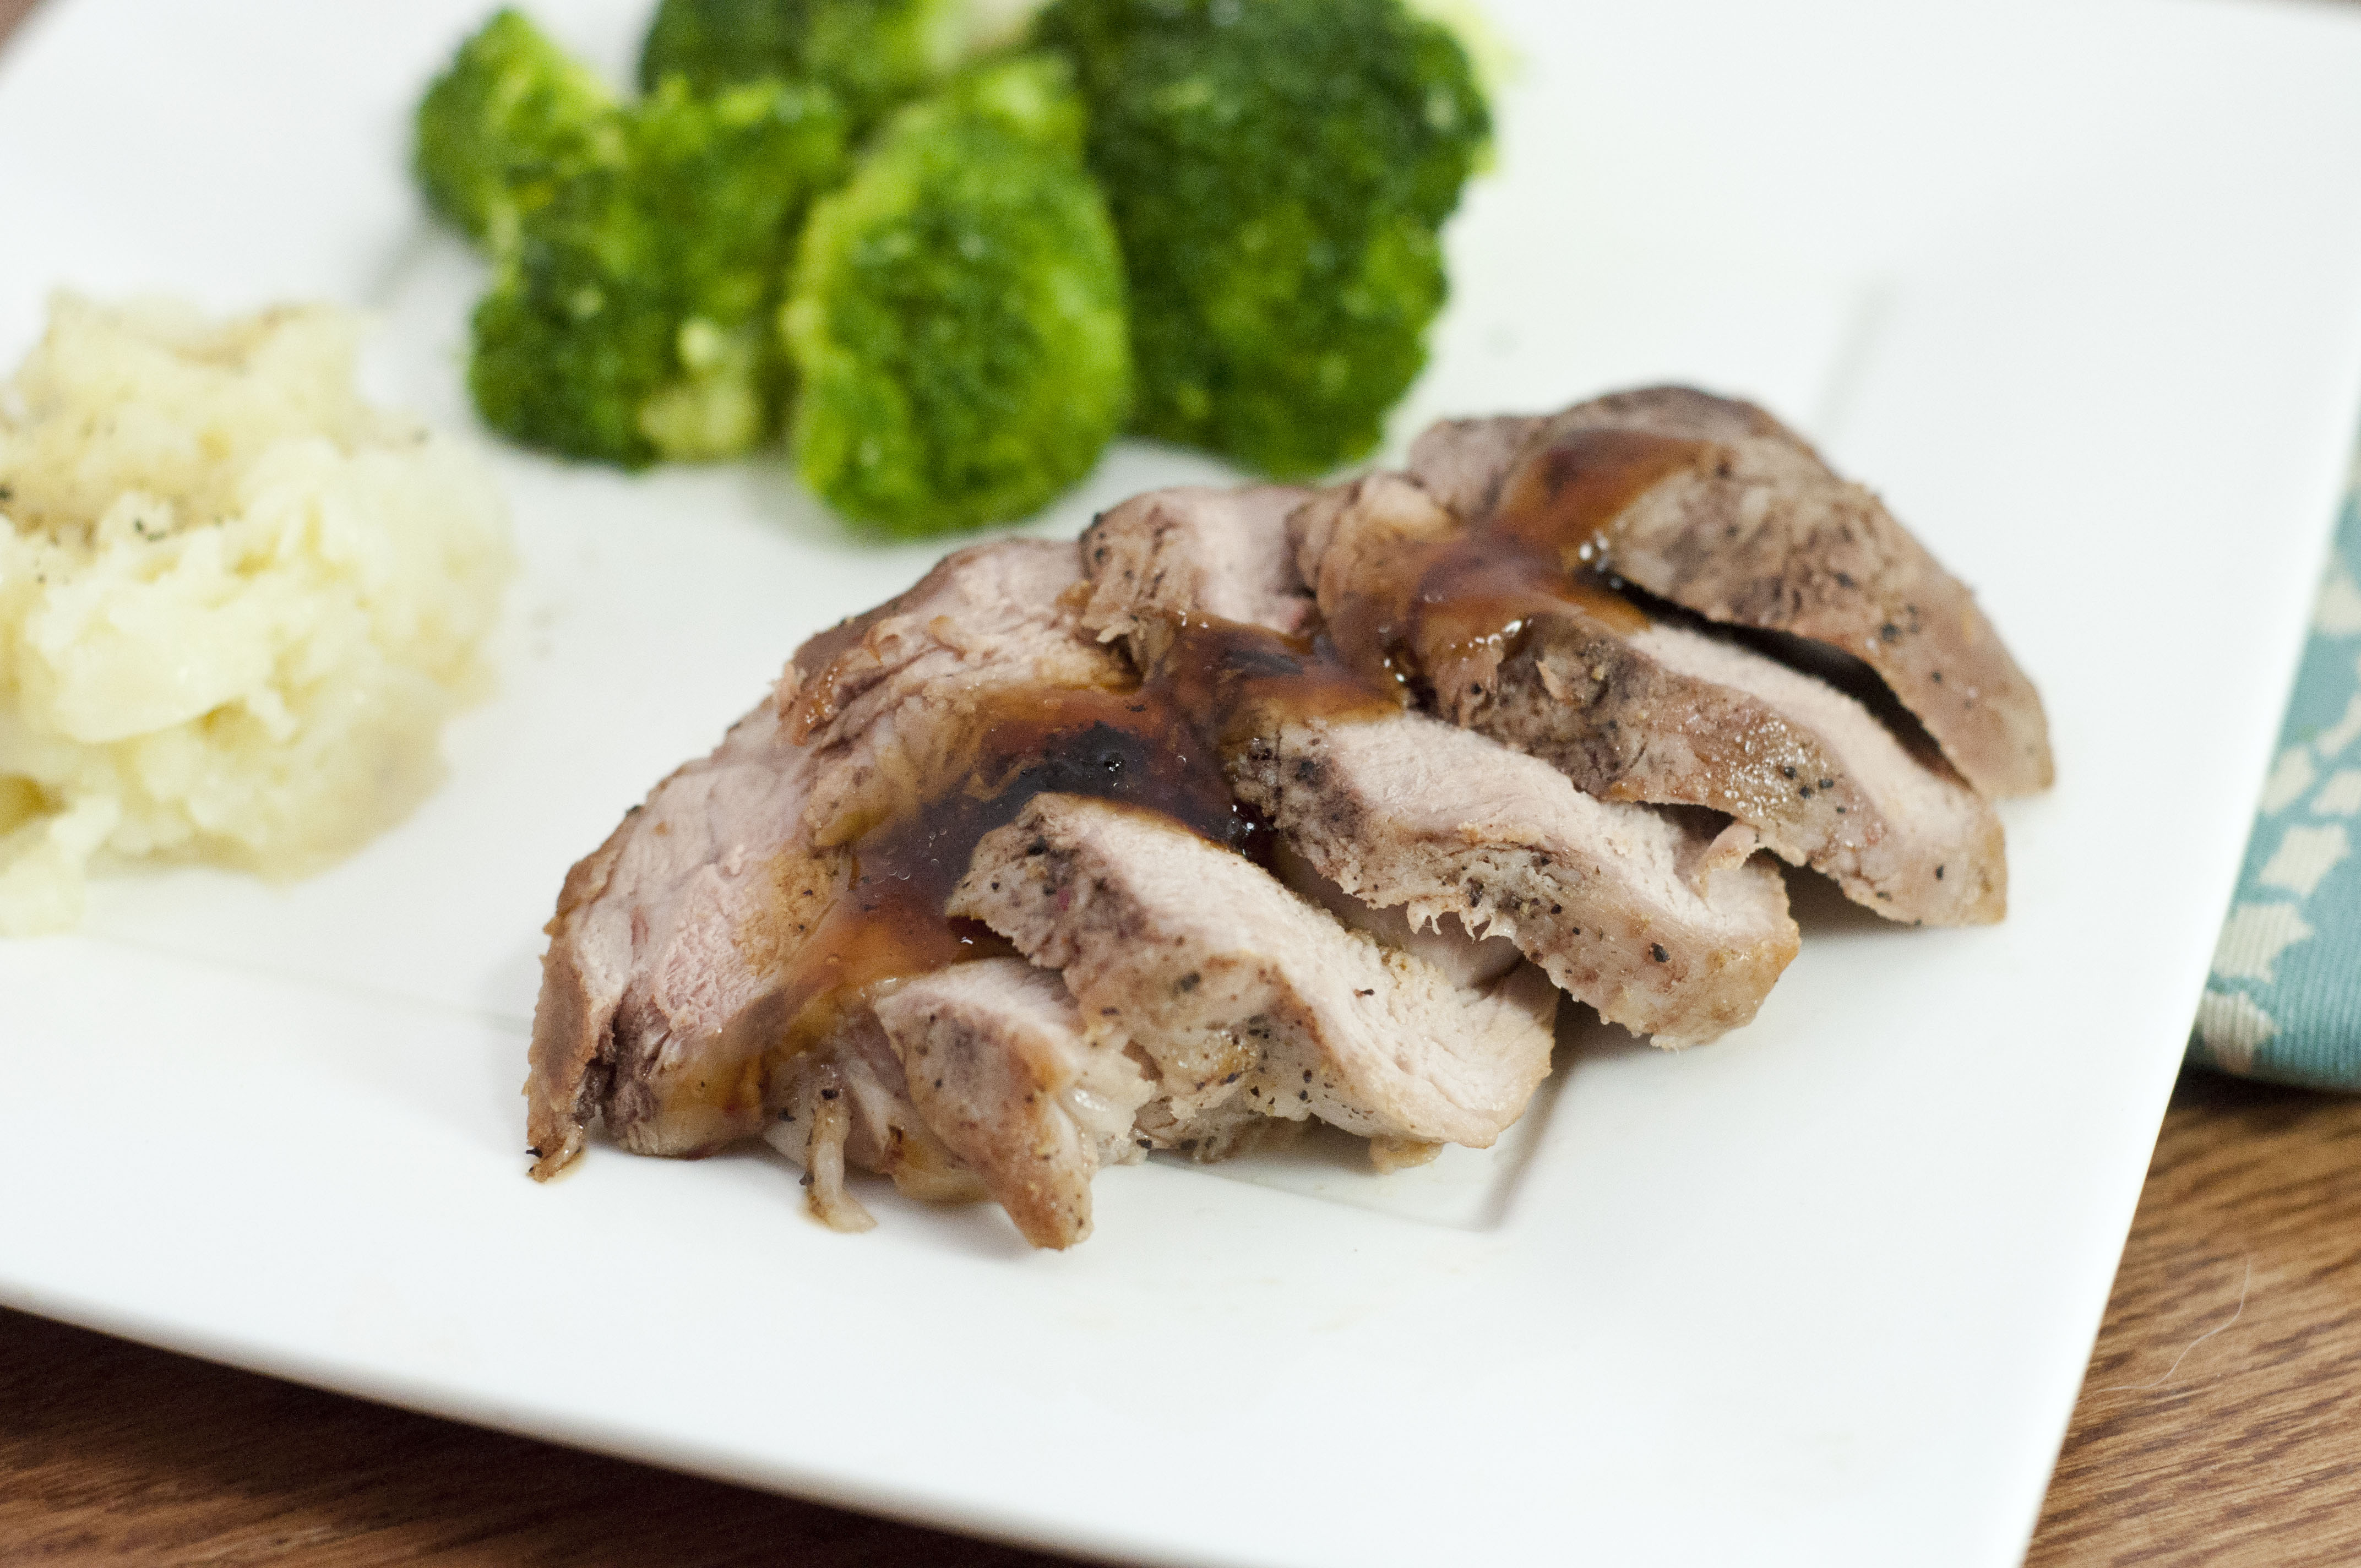 an image of brined teriyaki pork tenderloin with broccoli and potato in the background